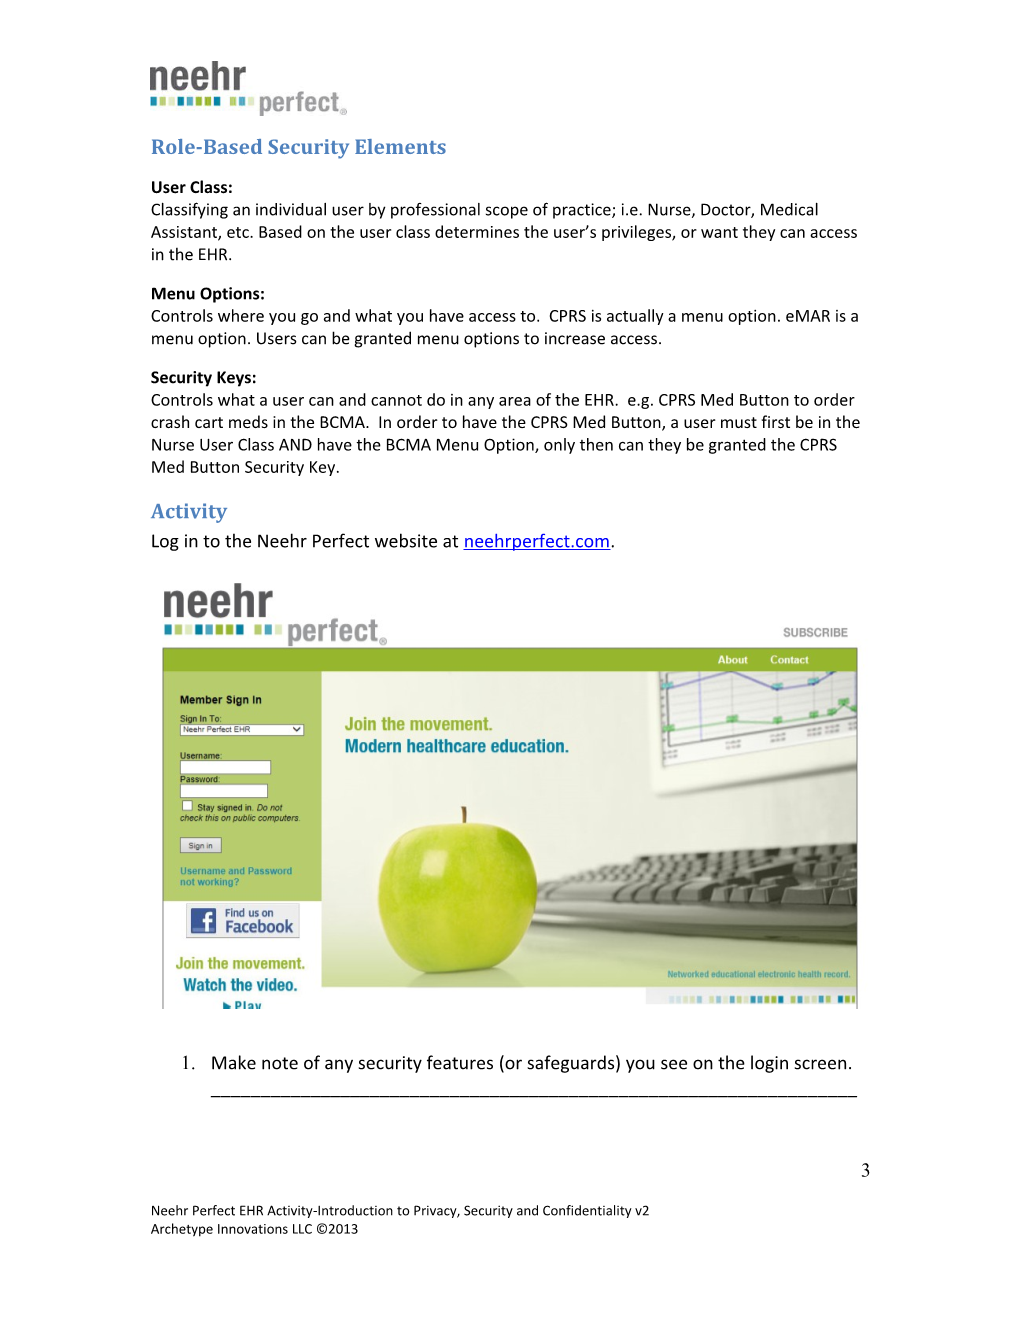 Neehr Perfect EHR Activity Introduction to Privacy, Security and Confidentiality